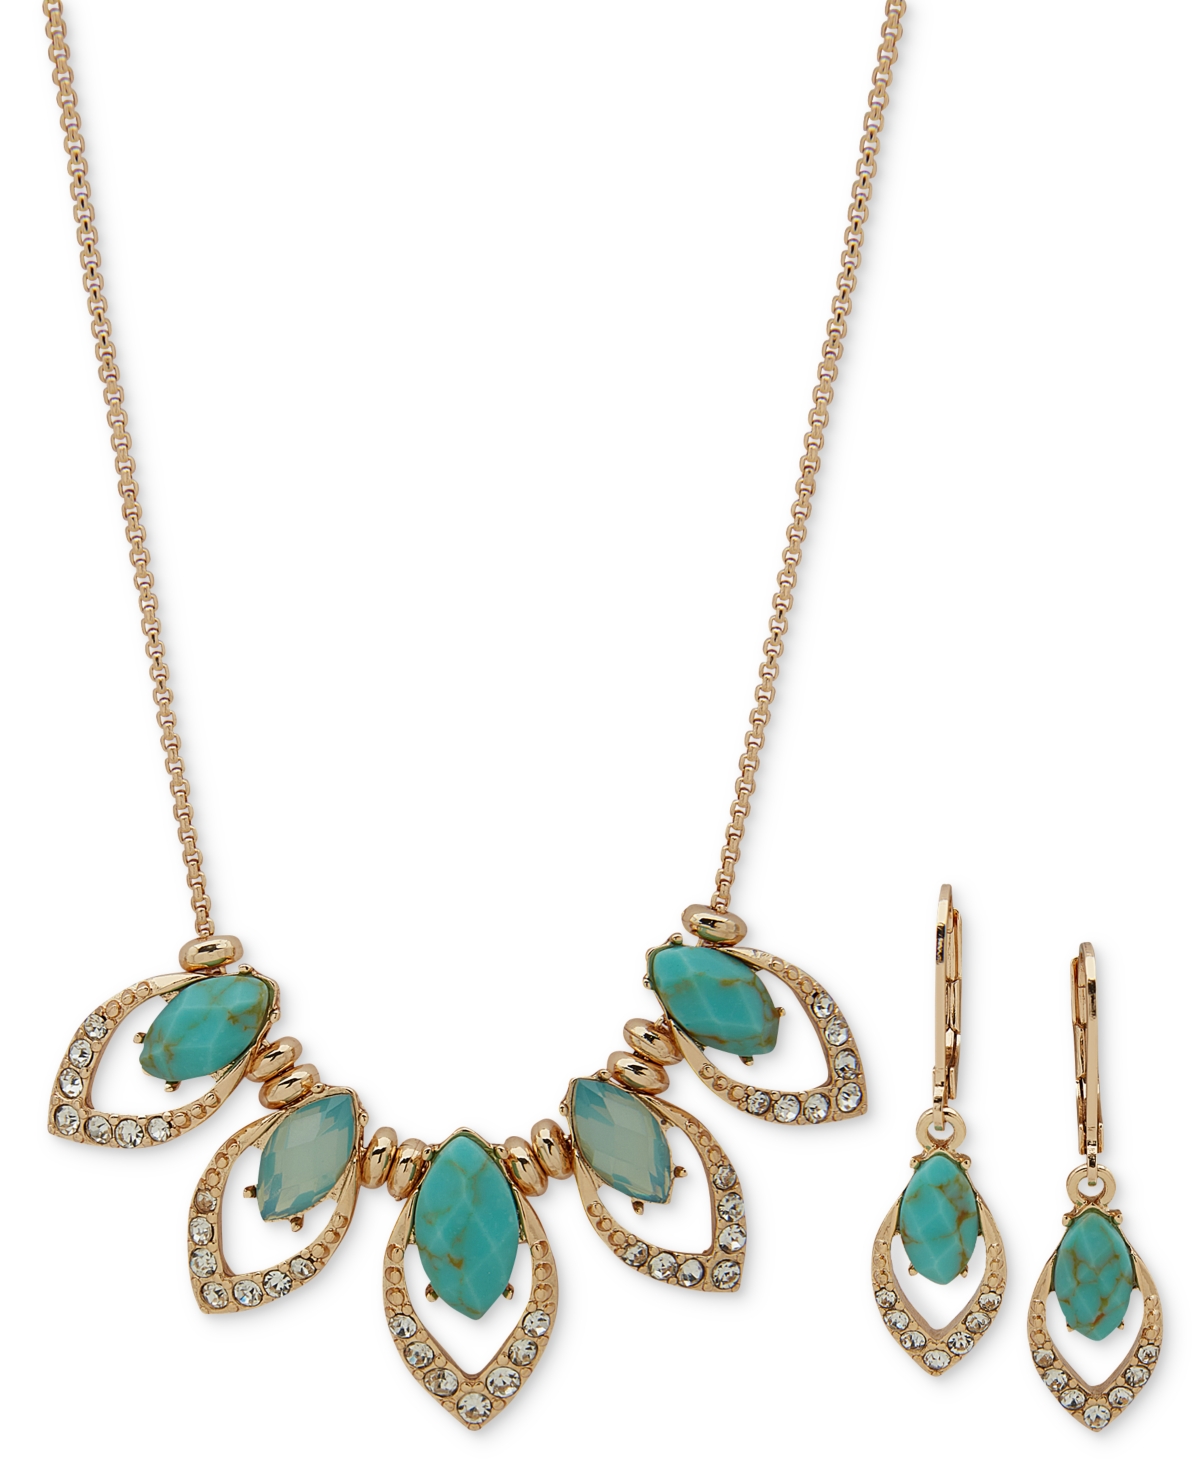 Gold-Tone Pave & Navette Stone Statement Necklace & Drop Earrings Set - Turquoise